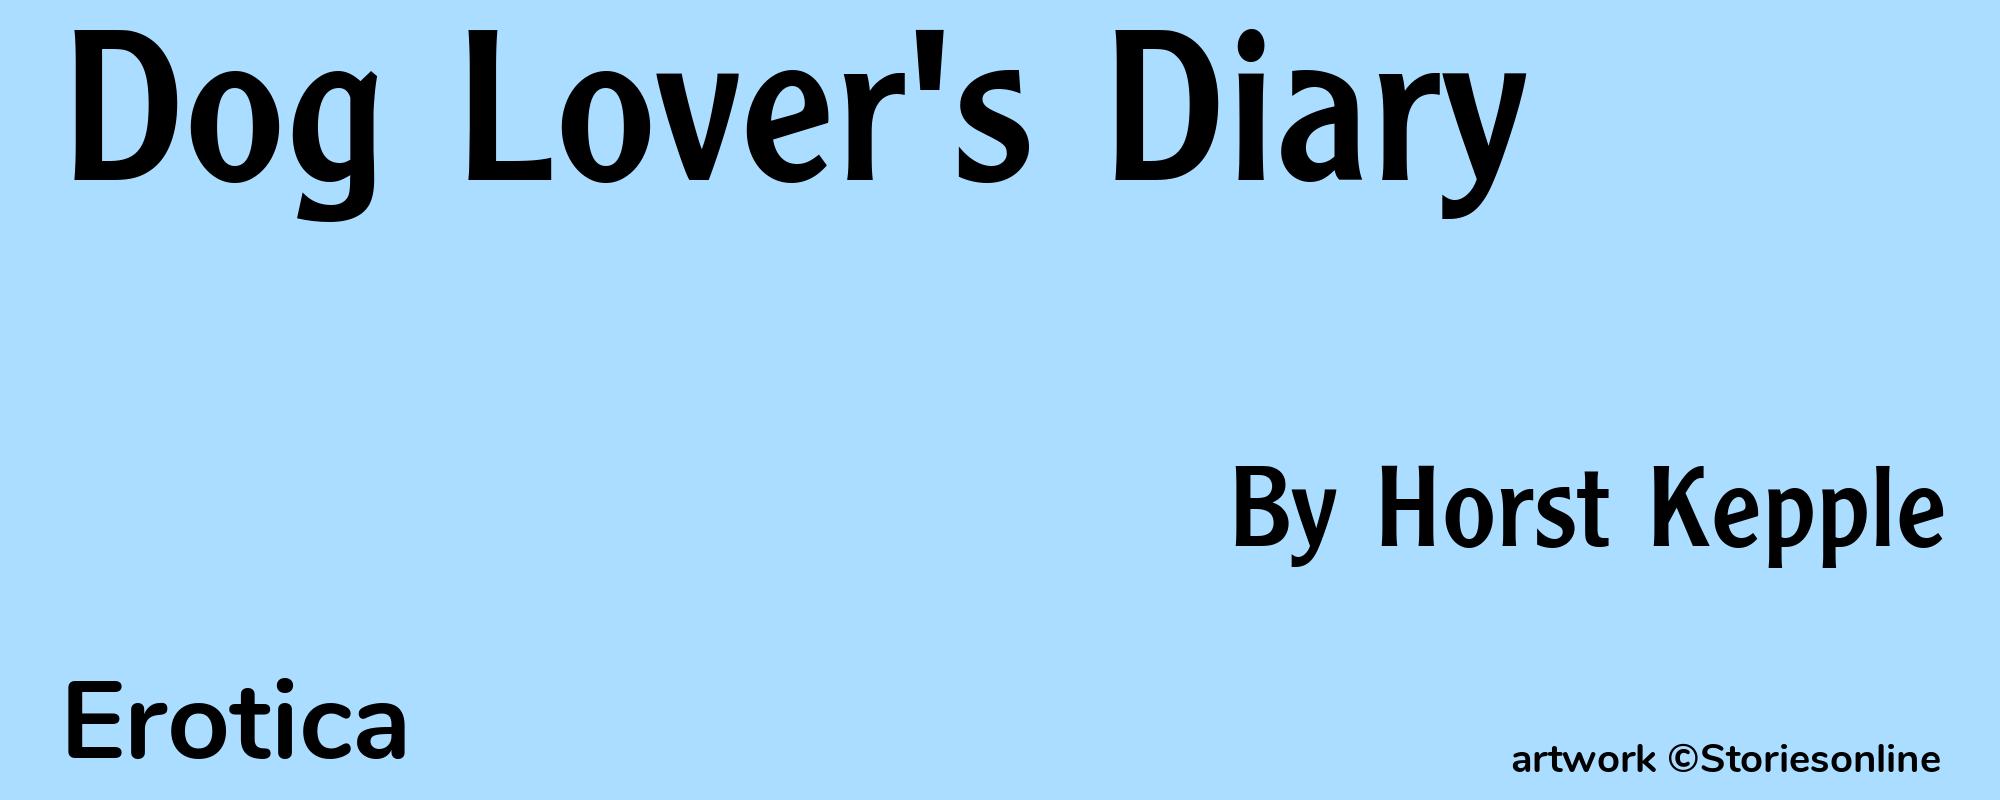 Dog Lover's Diary - Cover